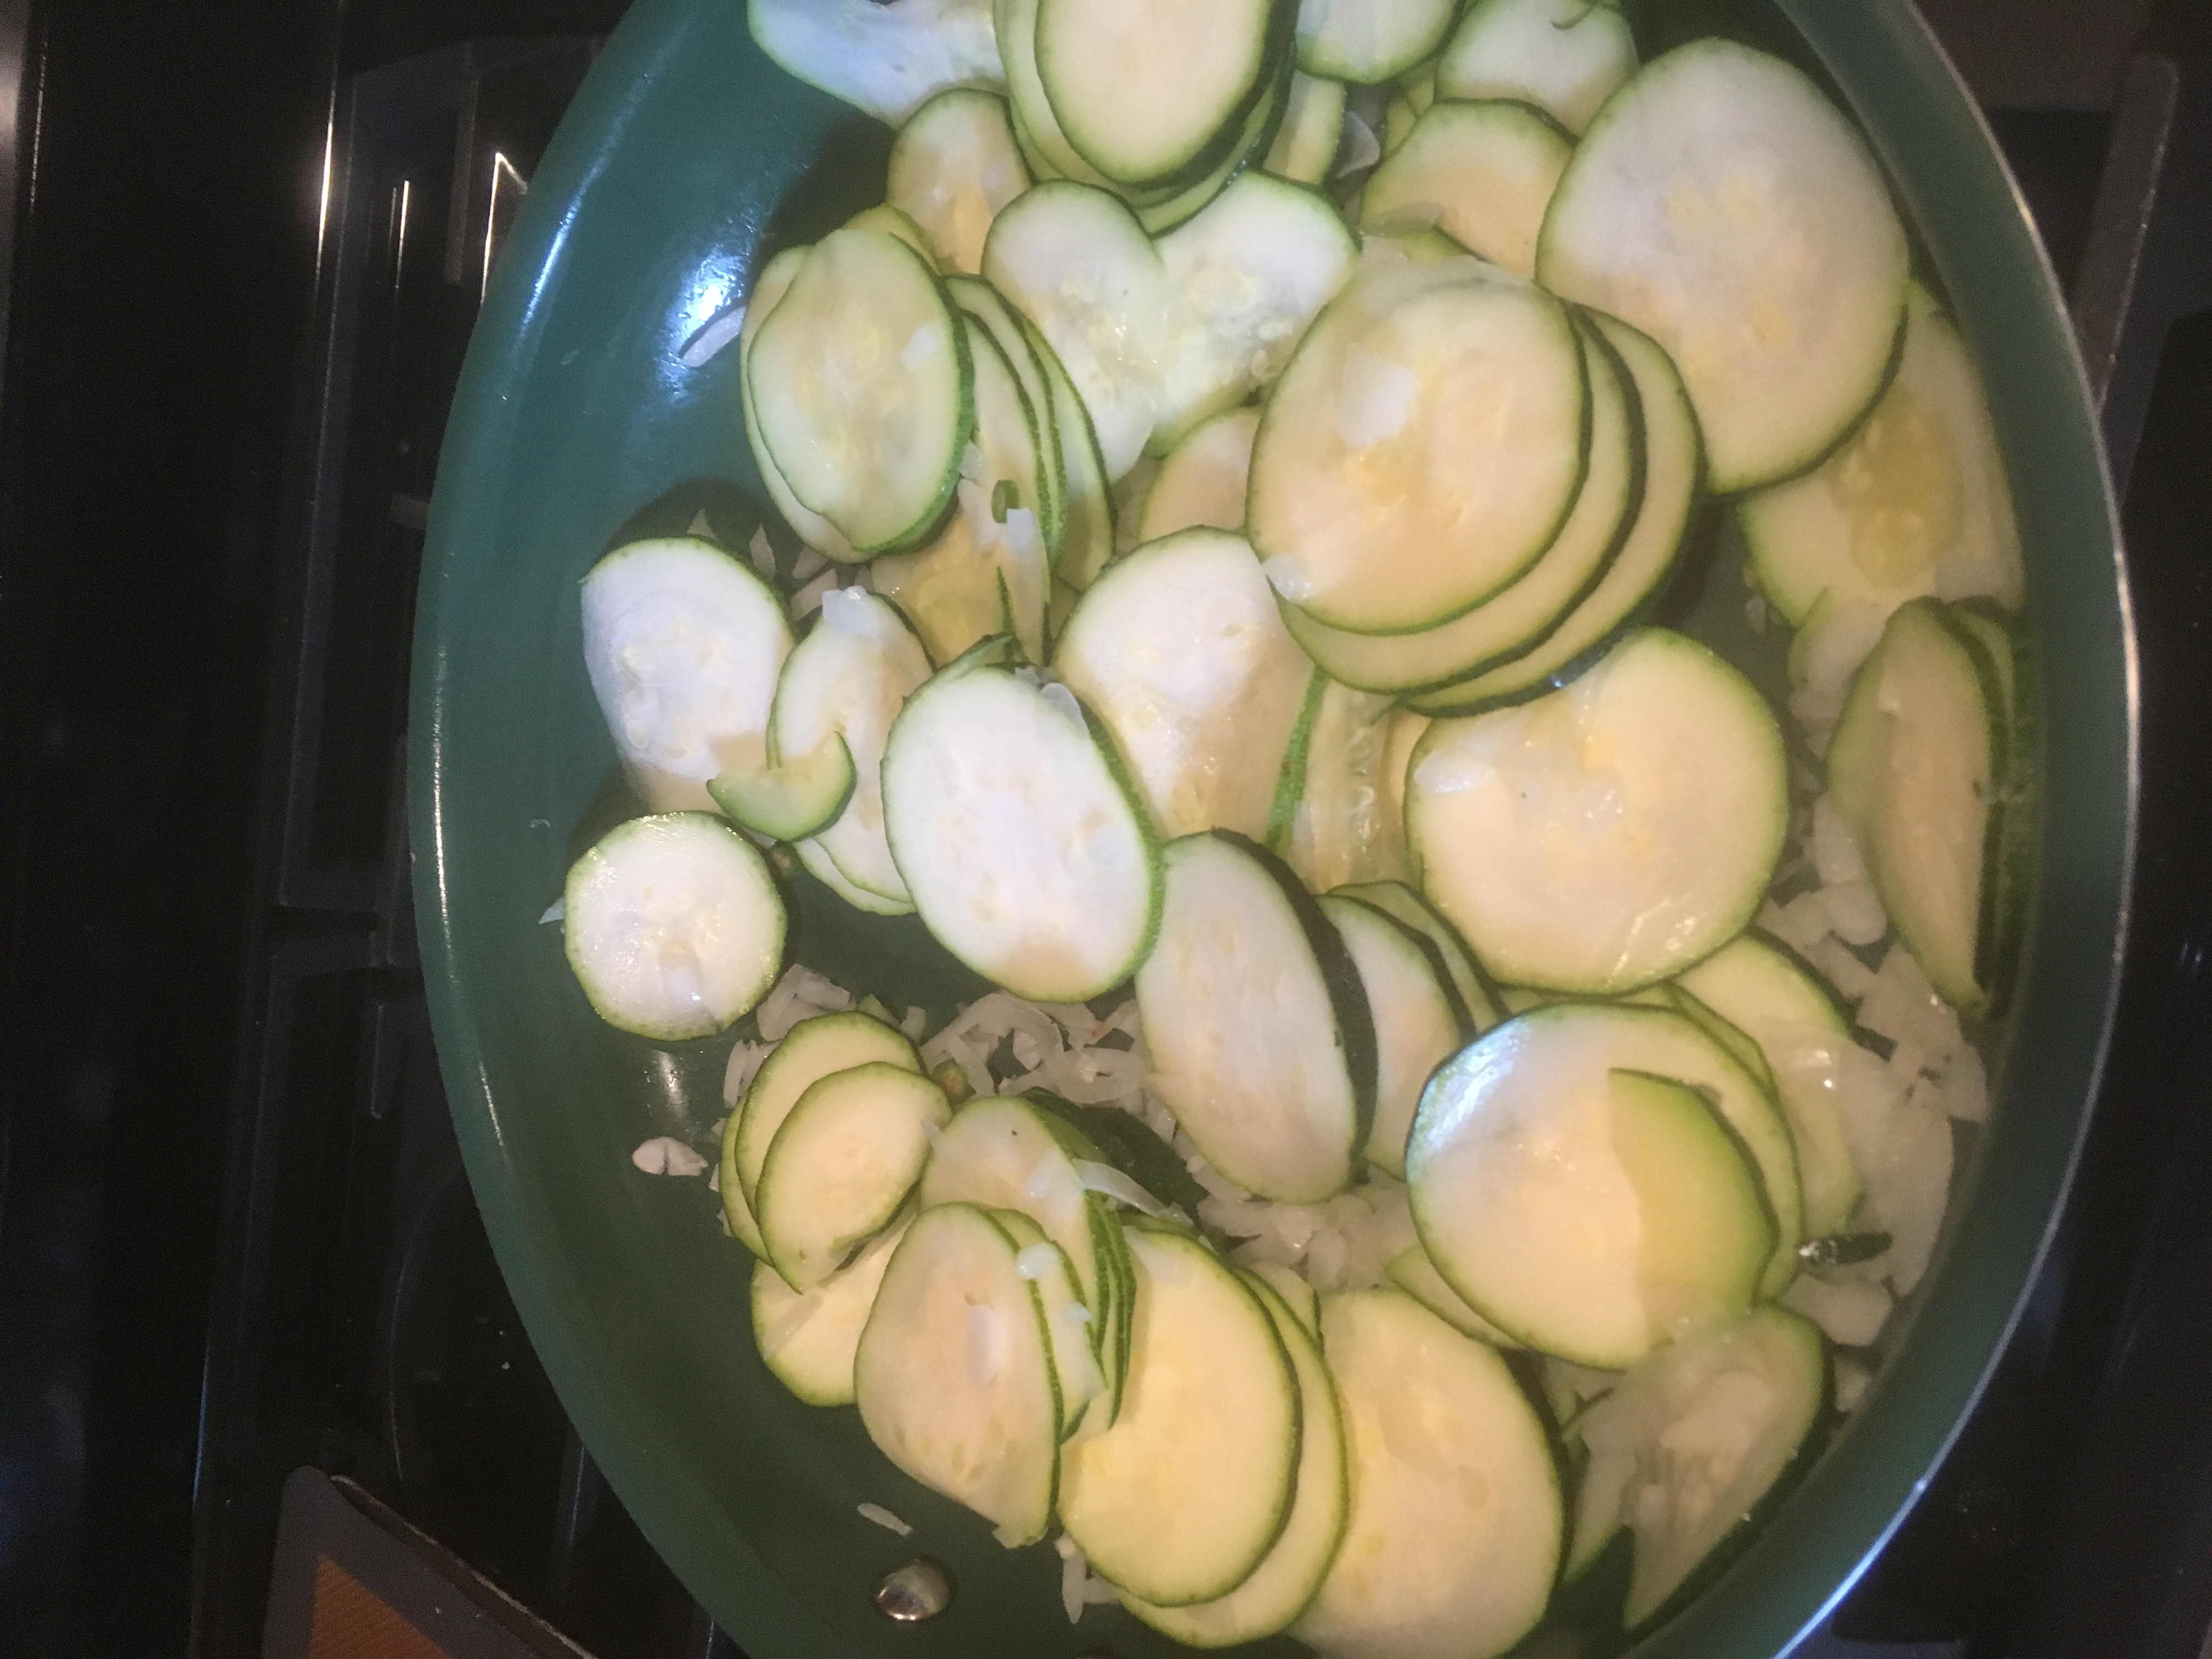 For the love of all things Zucchini